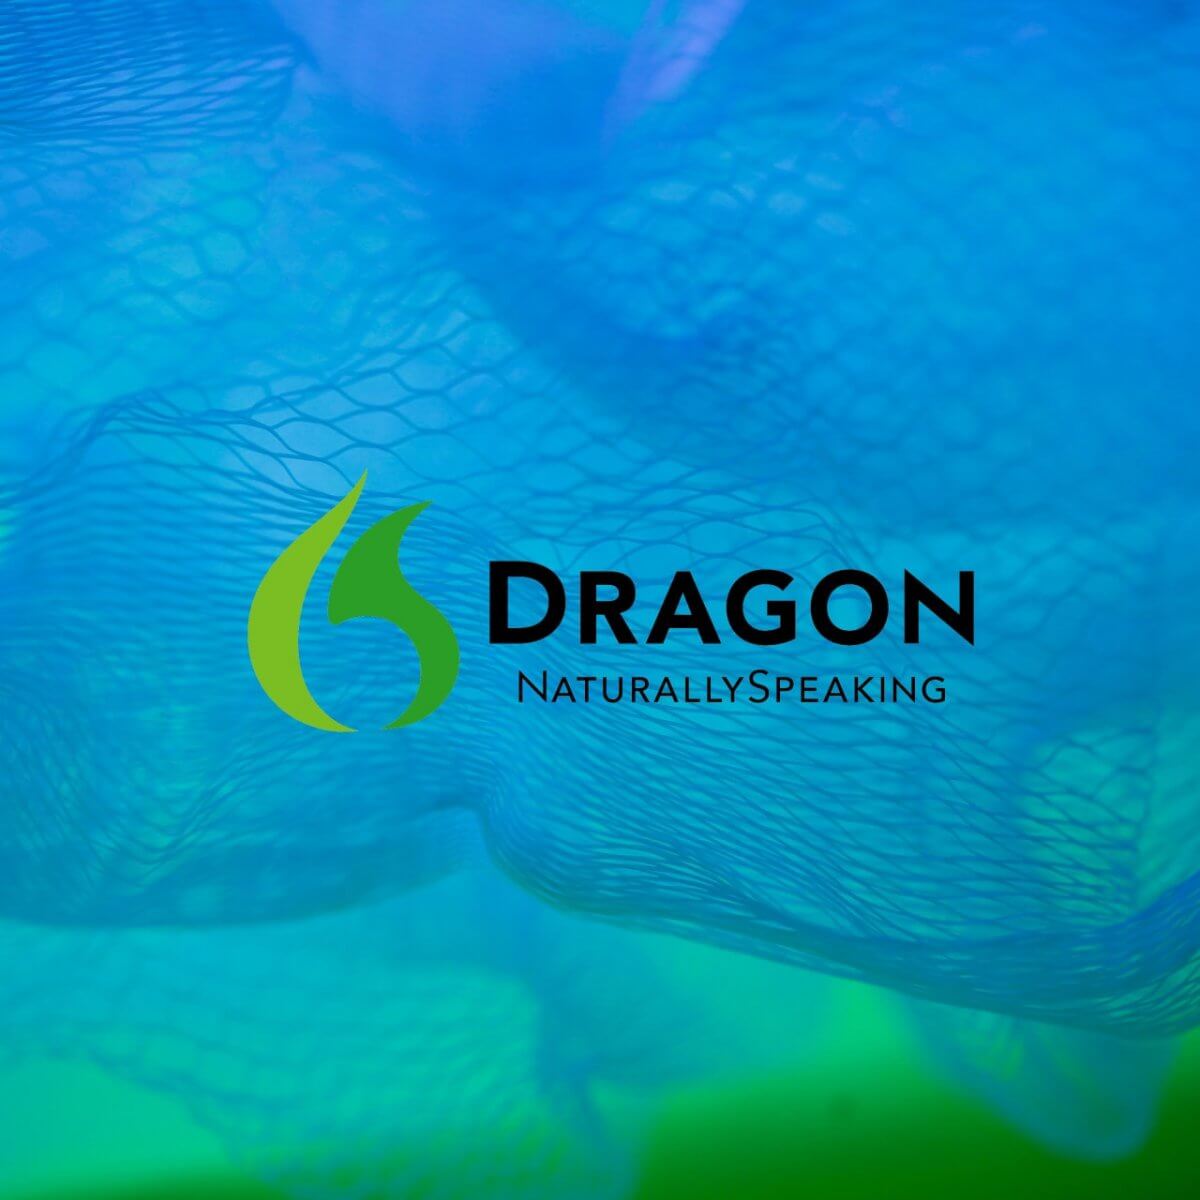 download dragon naturally speaking free trial